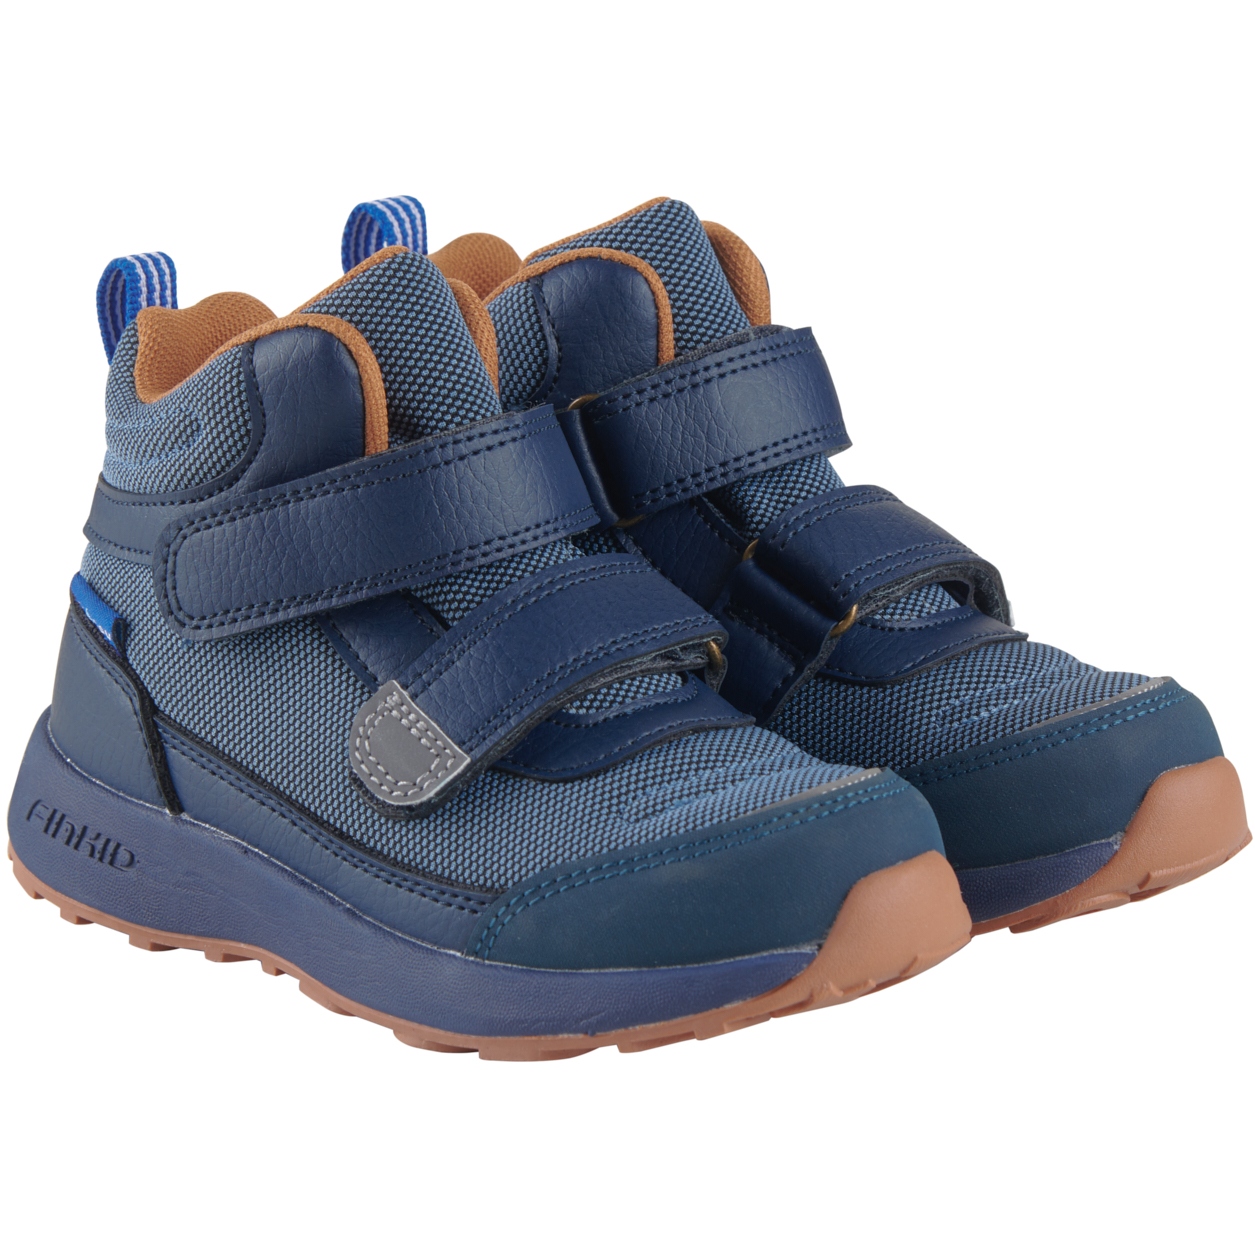 Picture of Finkid SOMERO Outdoor Shoes - Kids Hiking Shoes - dove/navy